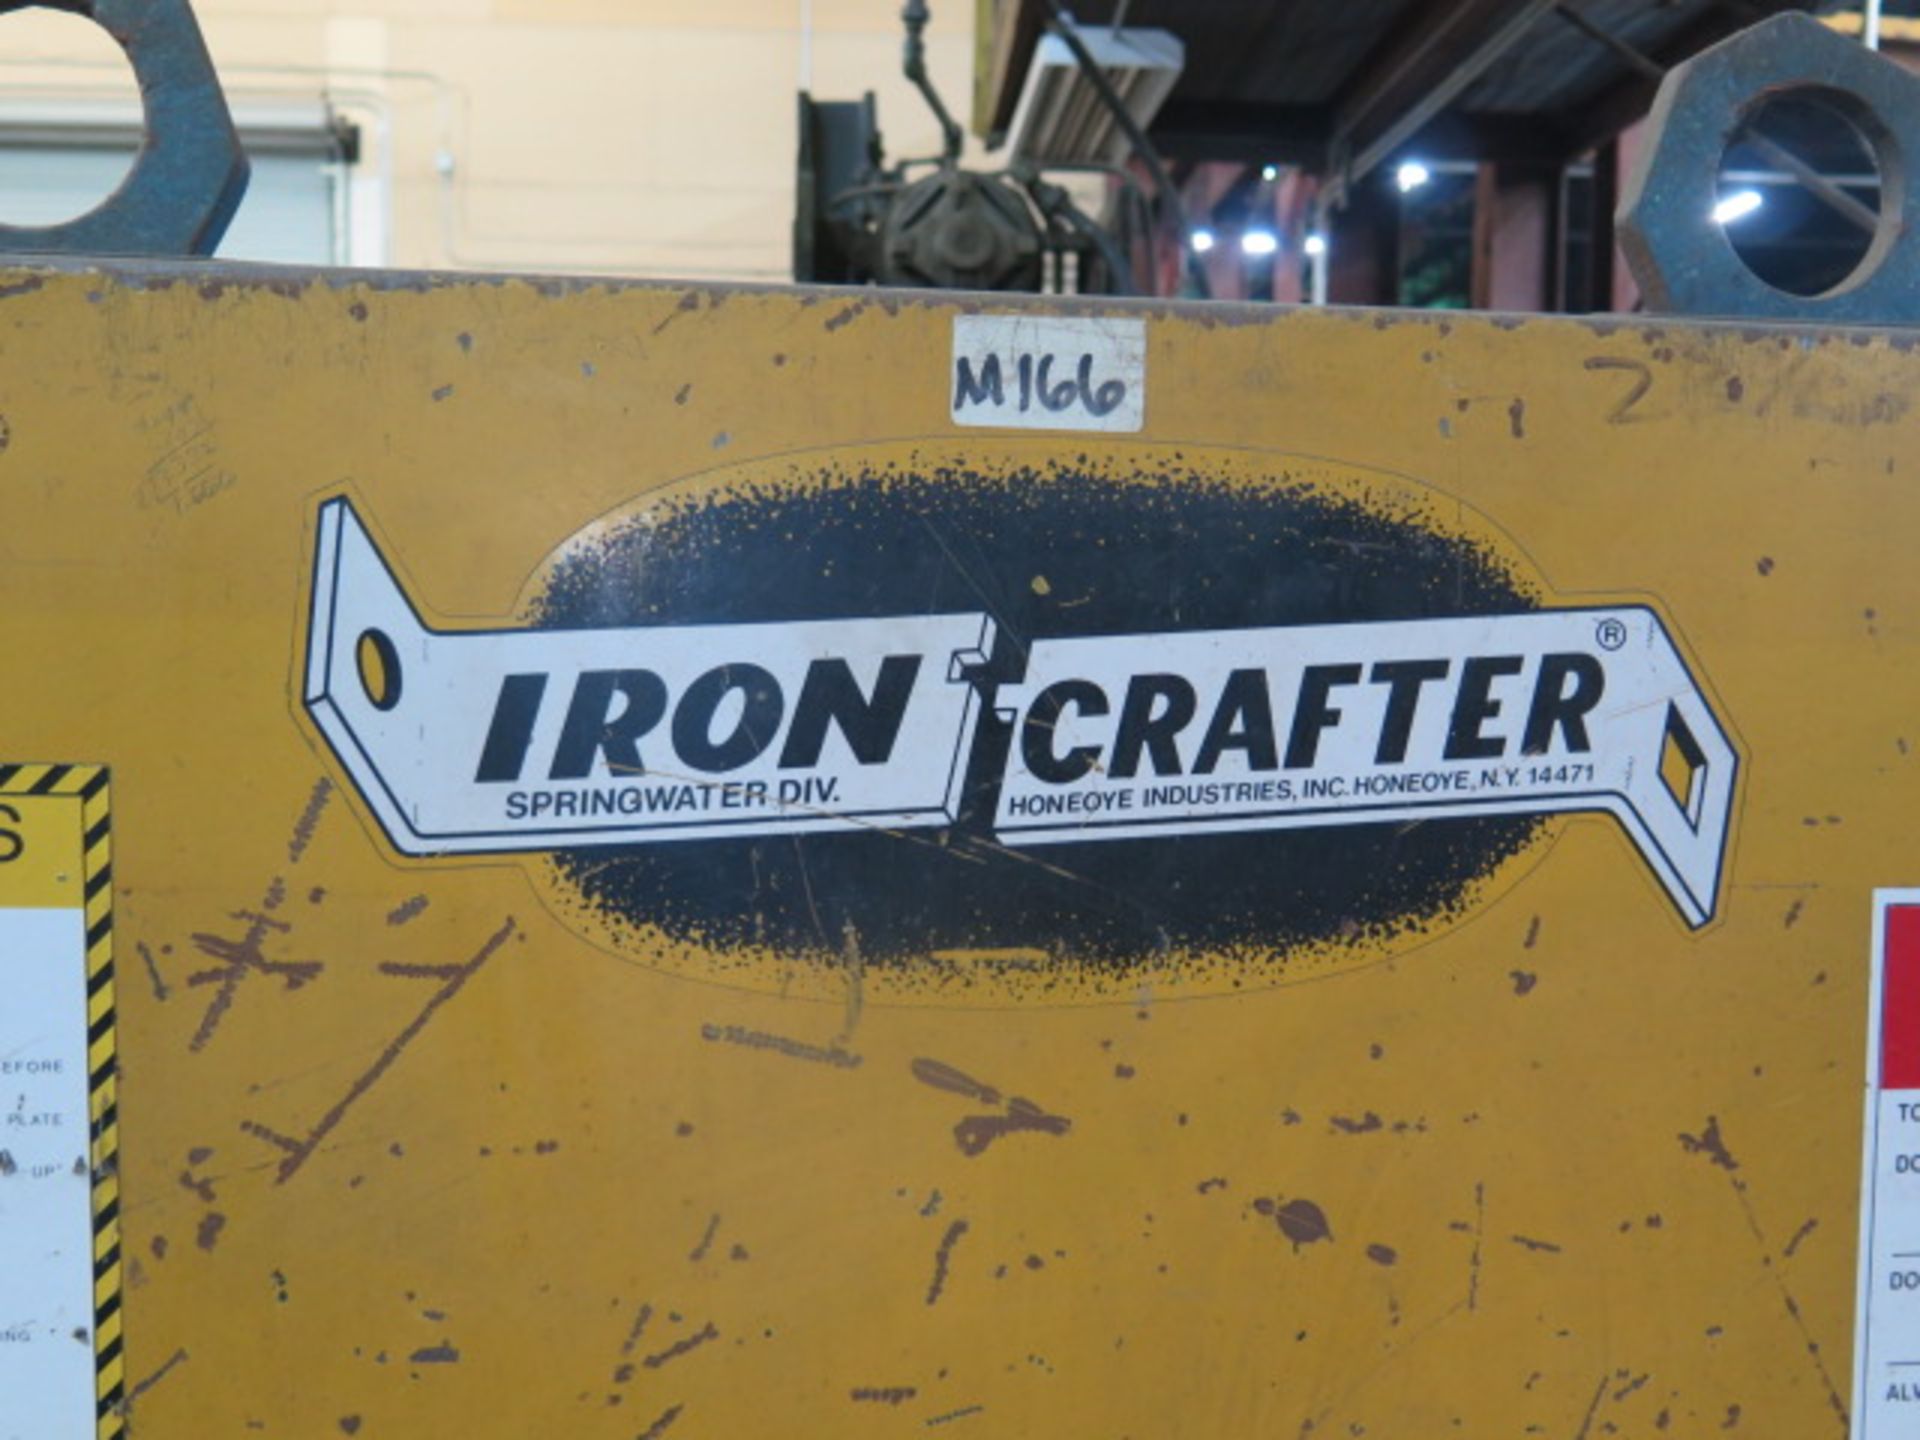 Iron Crafter mdl. HTS48 48” Power Shear s/n 80S043 (SOLD AS-IS - NO WARRANTY) - Image 9 of 11